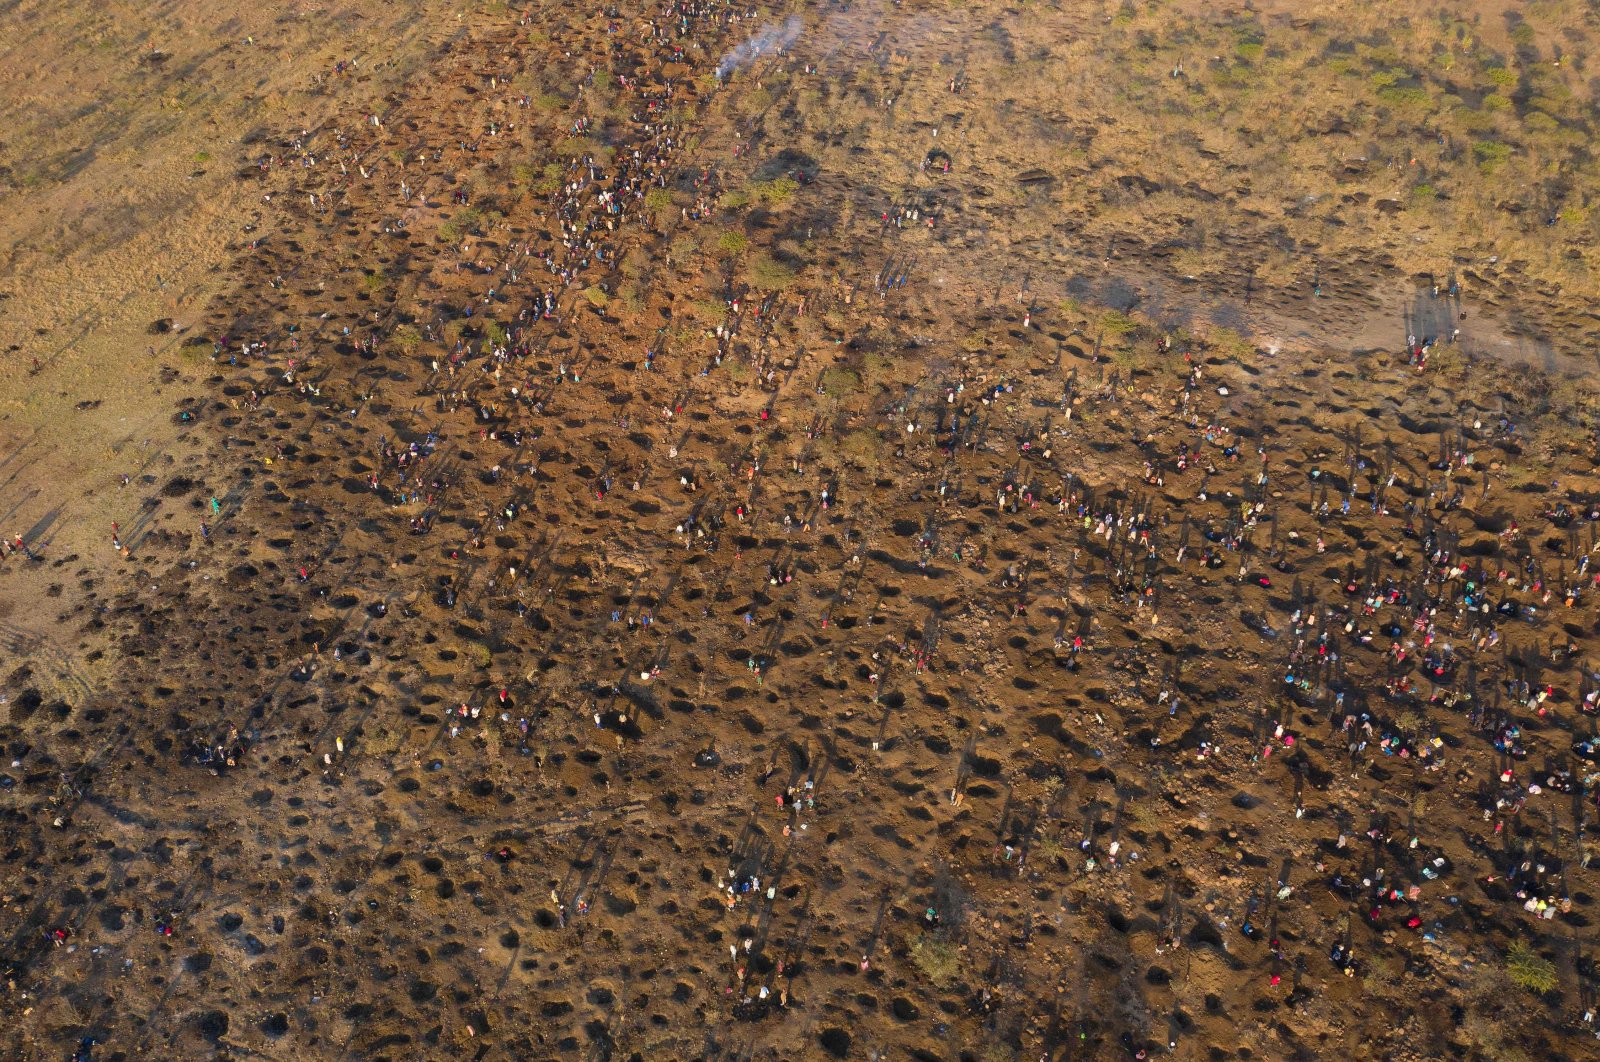 An aerial view shows people digging as they search for what they believe to be diamonds after the discovery of unidentified stones in KwaHlathi village near Ladysmith in KwaZulu Natal, South Africa, June 15, 2021. (AFP Photo)